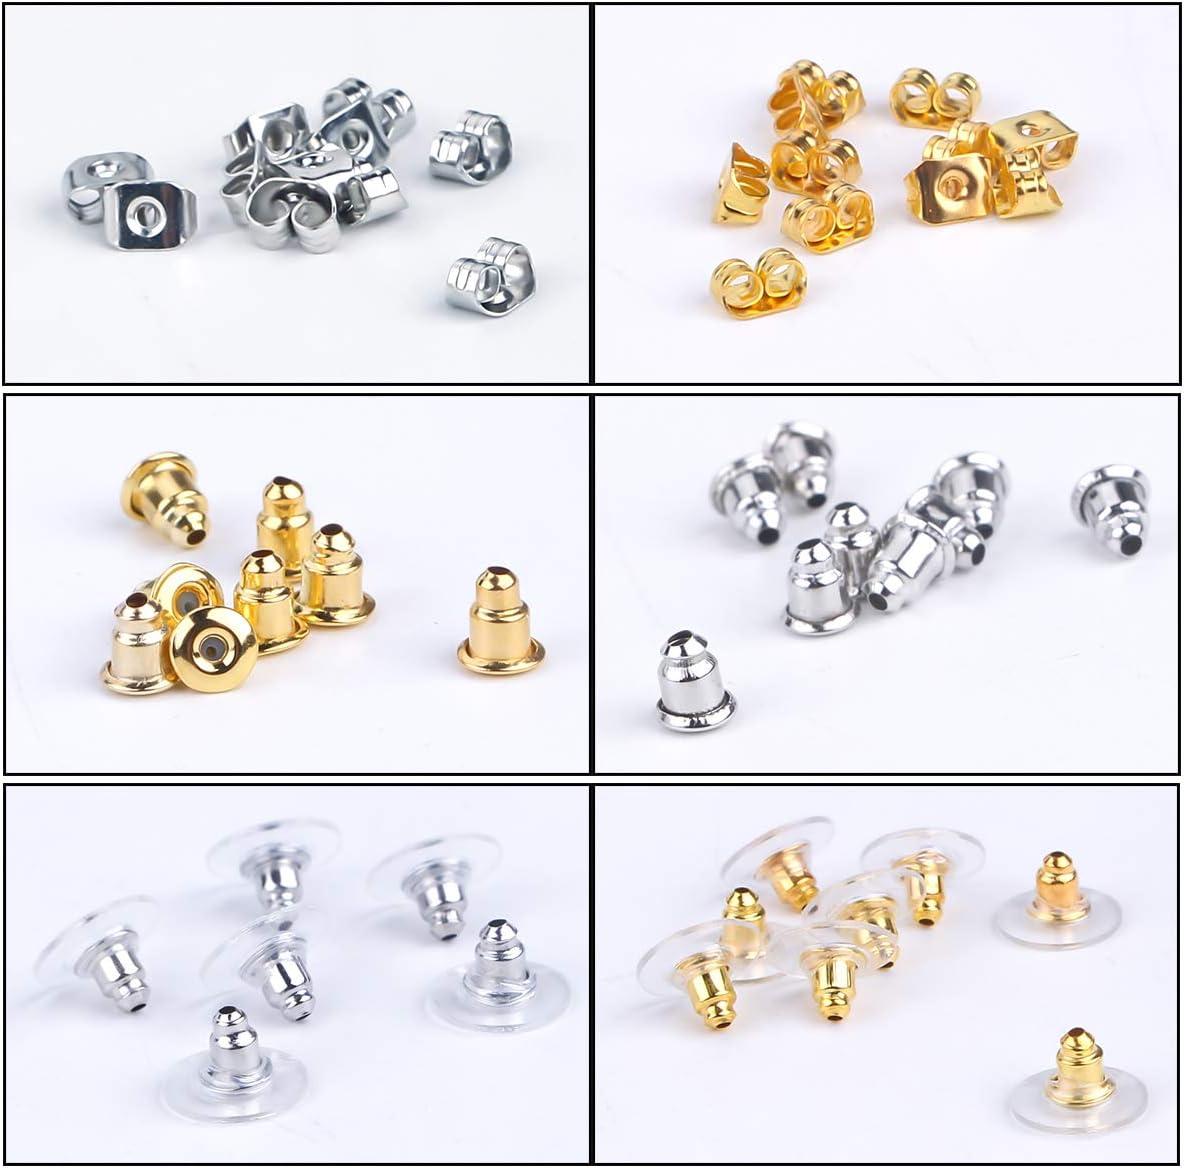 Clear Earring Backs, 200pcs Plastic Earring Stoppers, Tube Earring Findings, Hypo-Allergenic Jewelry Accessories